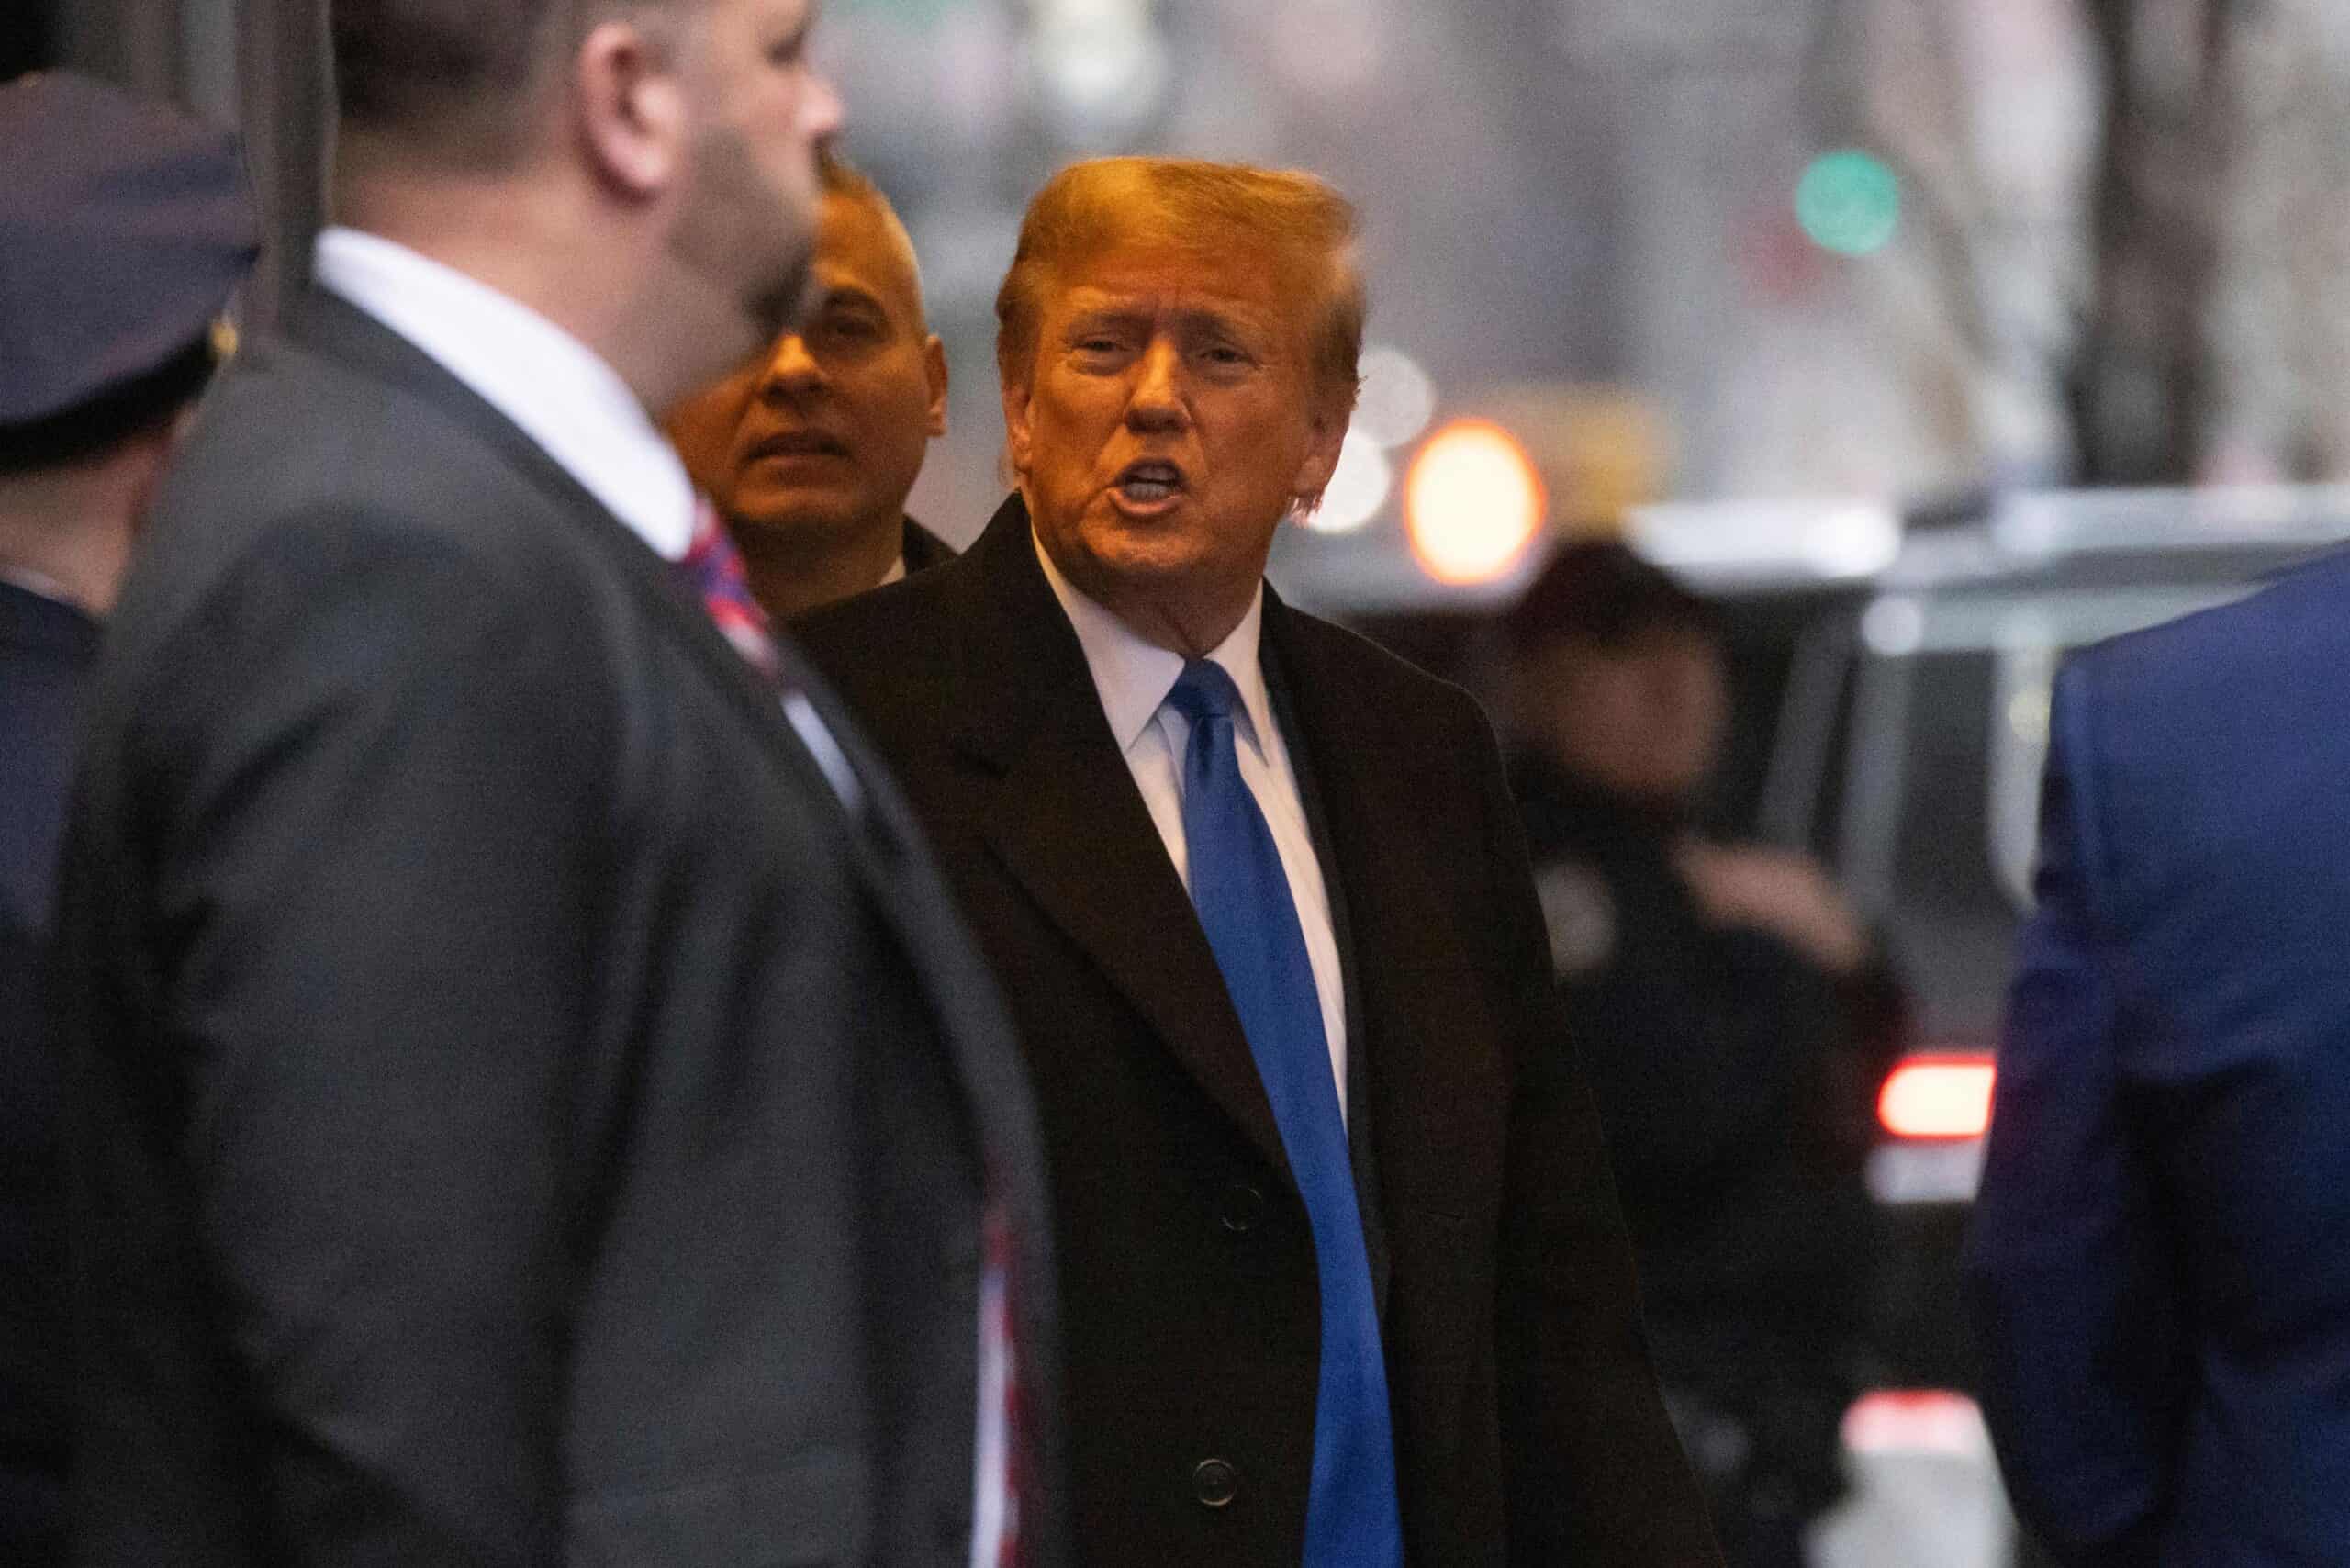 Trump just gets up and walks out of closing arguments in court case